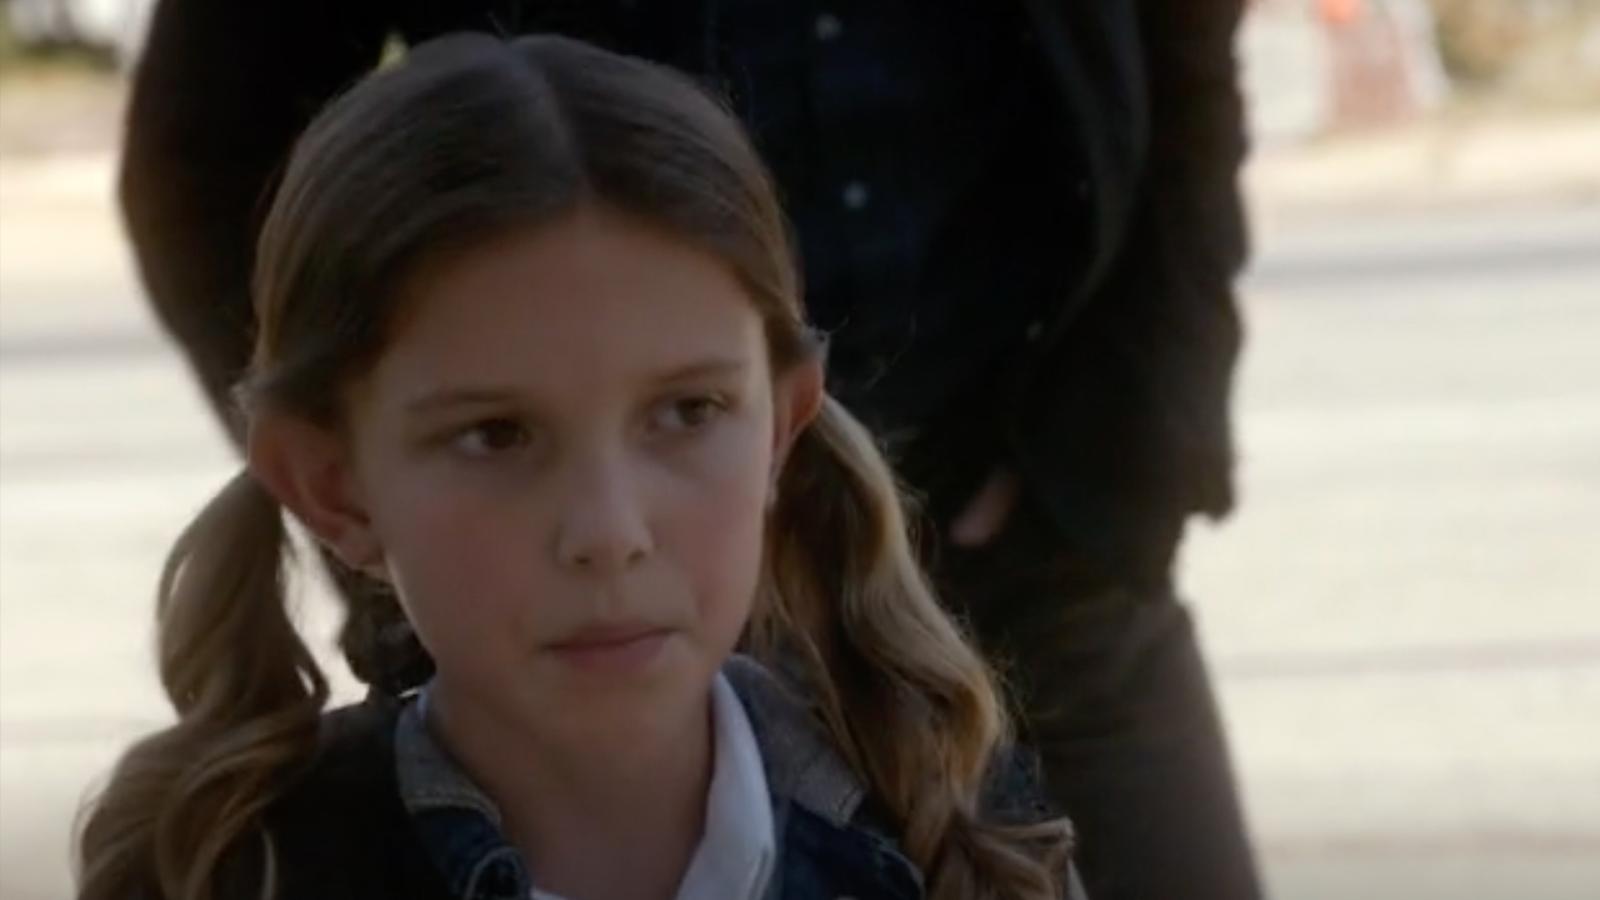 Millie Bobby Brown's NCIS Role Proves She Has Range Most Can Only Dream Of - image 1